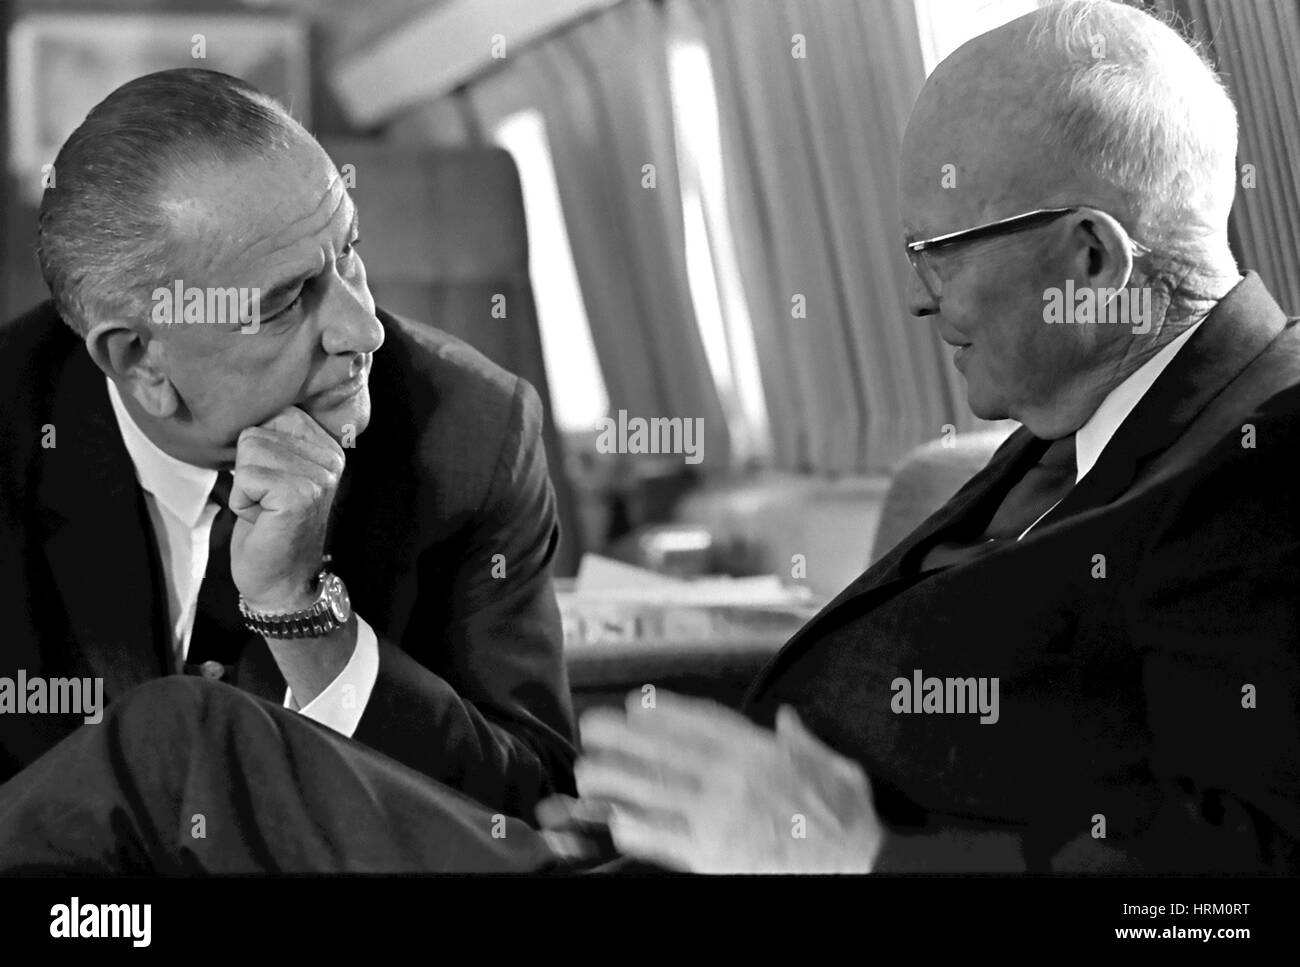 DWIGHT D. EISENHOIWER former US President  at right in conversation with President  :yndon B. Johnson on board Air Force One in October 1965. Photo: Yoichi Okamoto/White House official Stock Photo